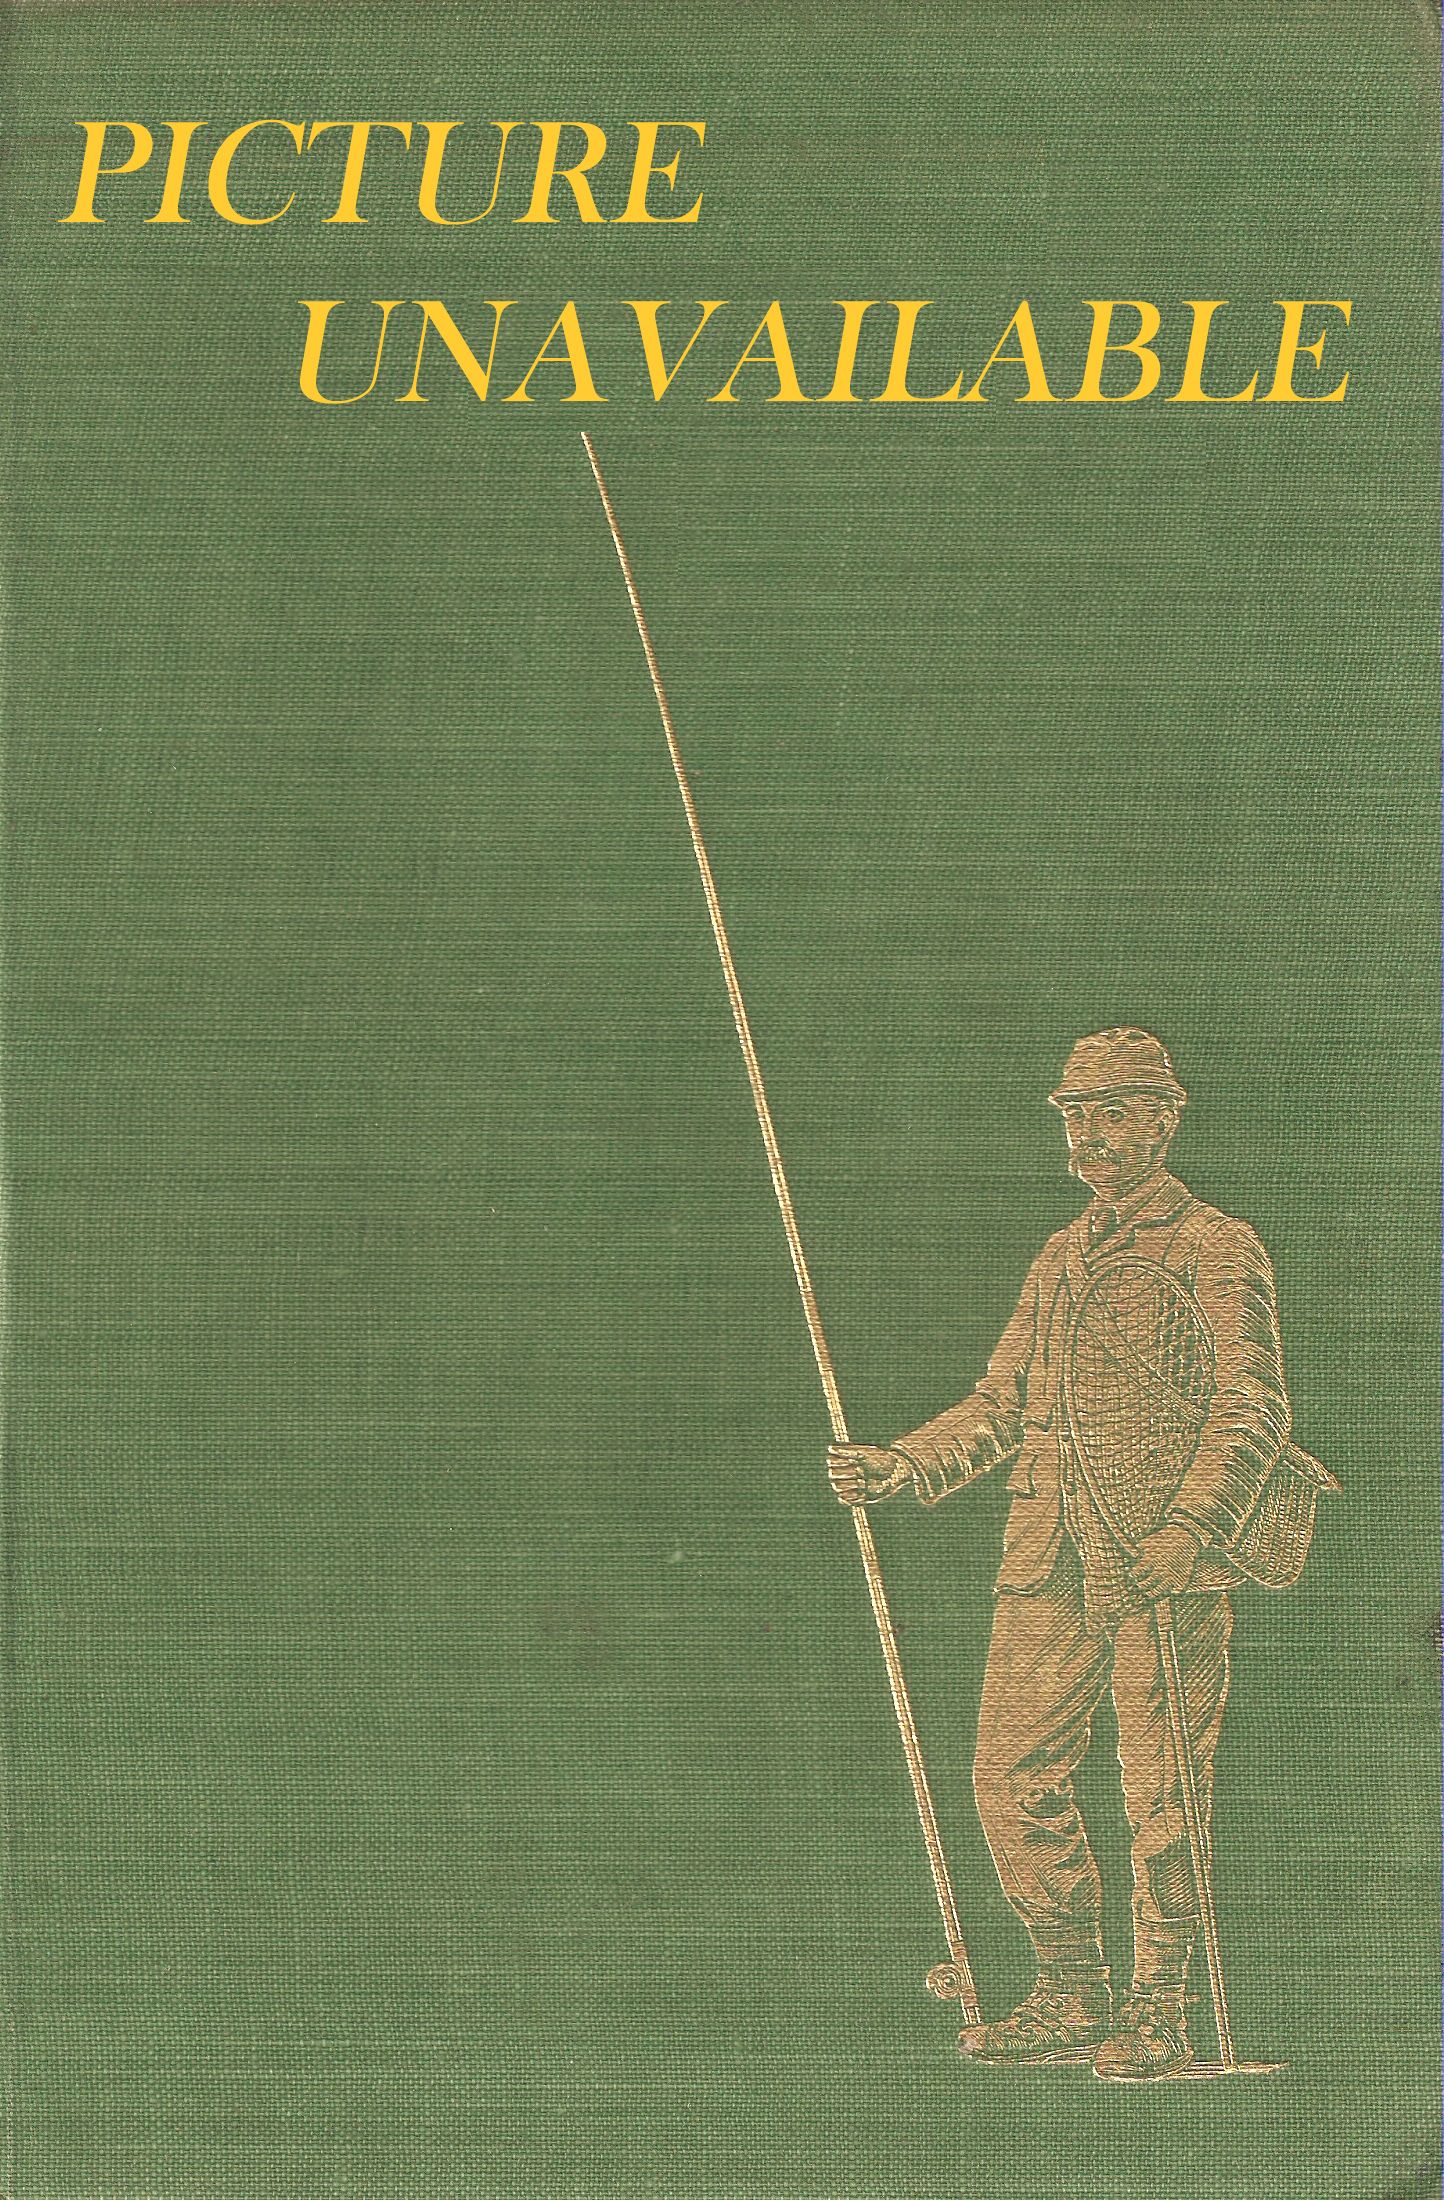 THE SPORTING SPANIEL. By C.A. Phillips and R. Claude Caine. Second edition.